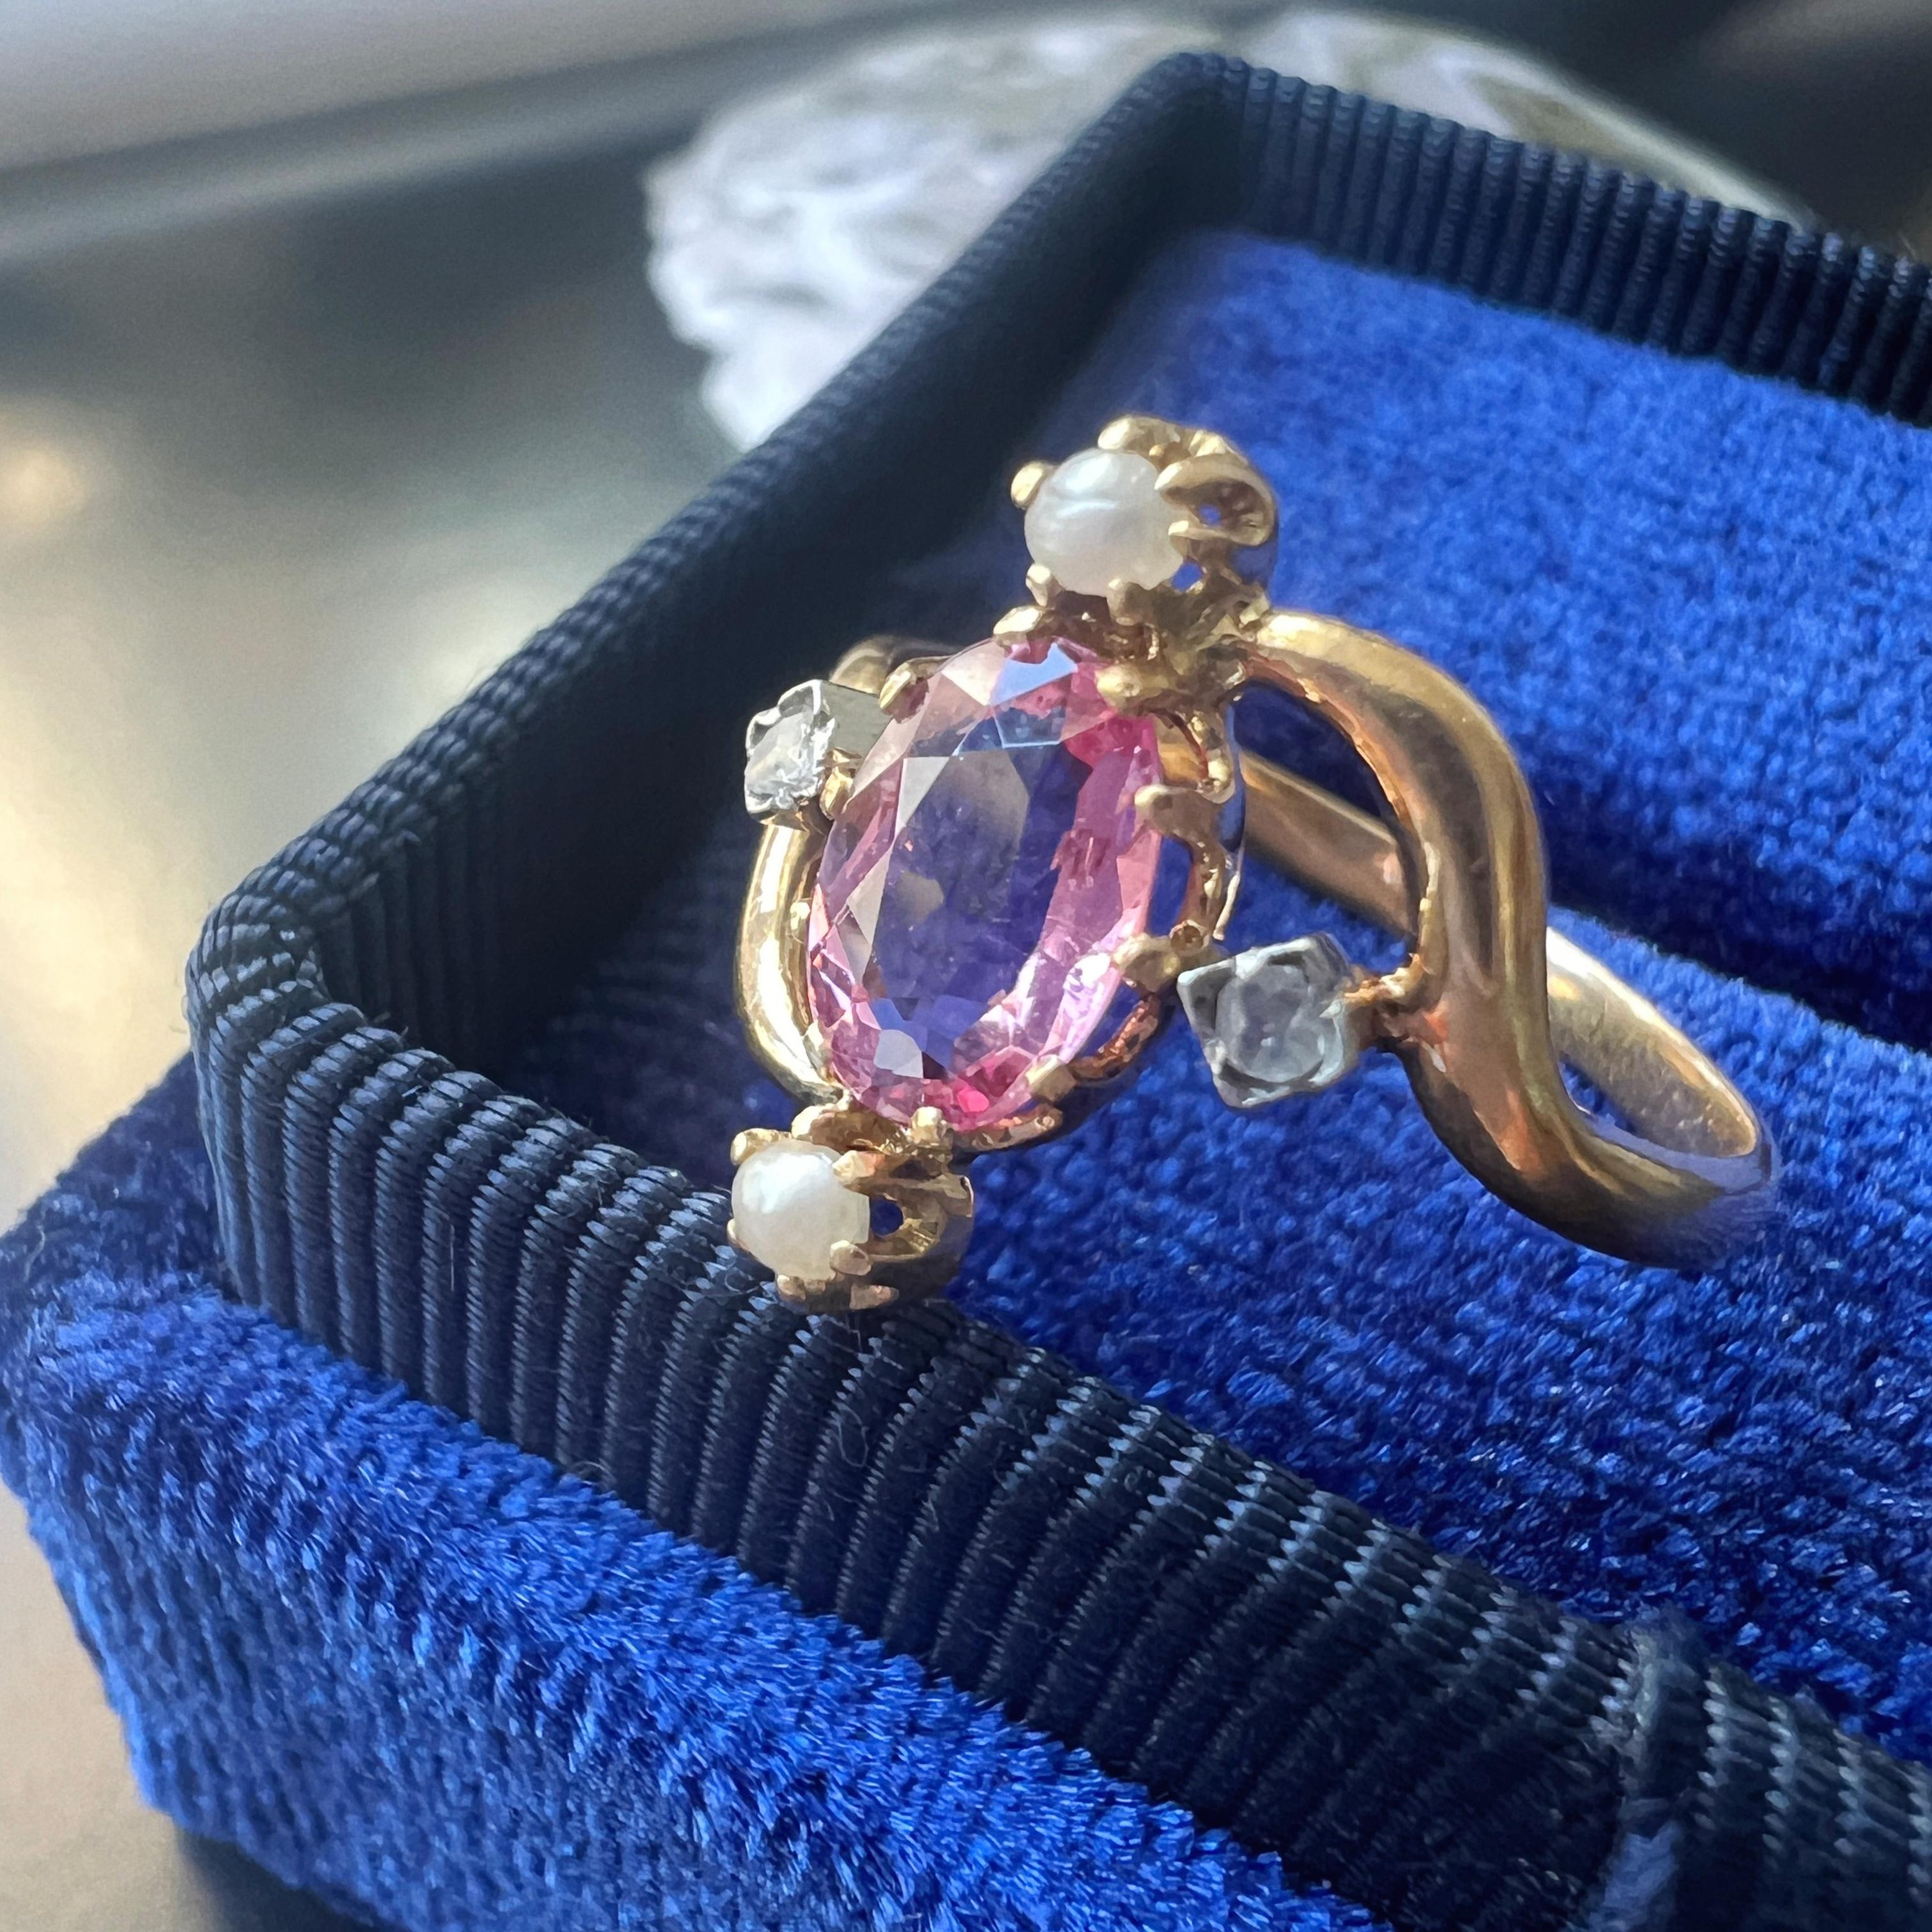 The fresh feel of spring is perfectly captured in this beautiful 18K gold pink tourmaline ring.
In soft tones which remind us of a cherry blossom, this 19th century, Victorian era ring is the perfect piece to usher in spring.

The ring features an